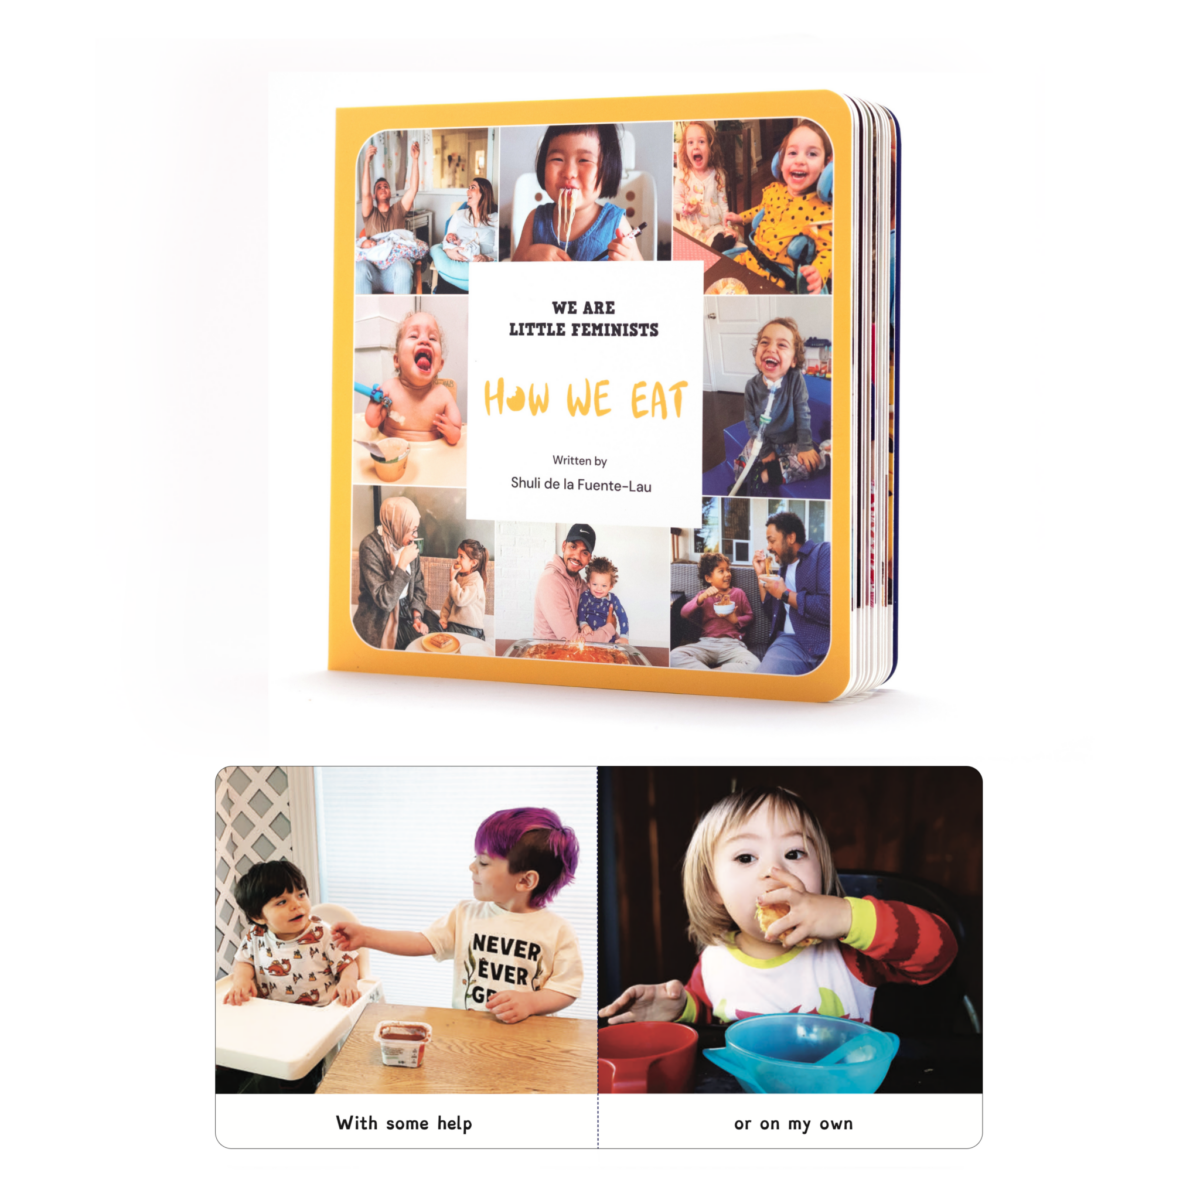 We Are Little Feminists Box Set How We Eat book